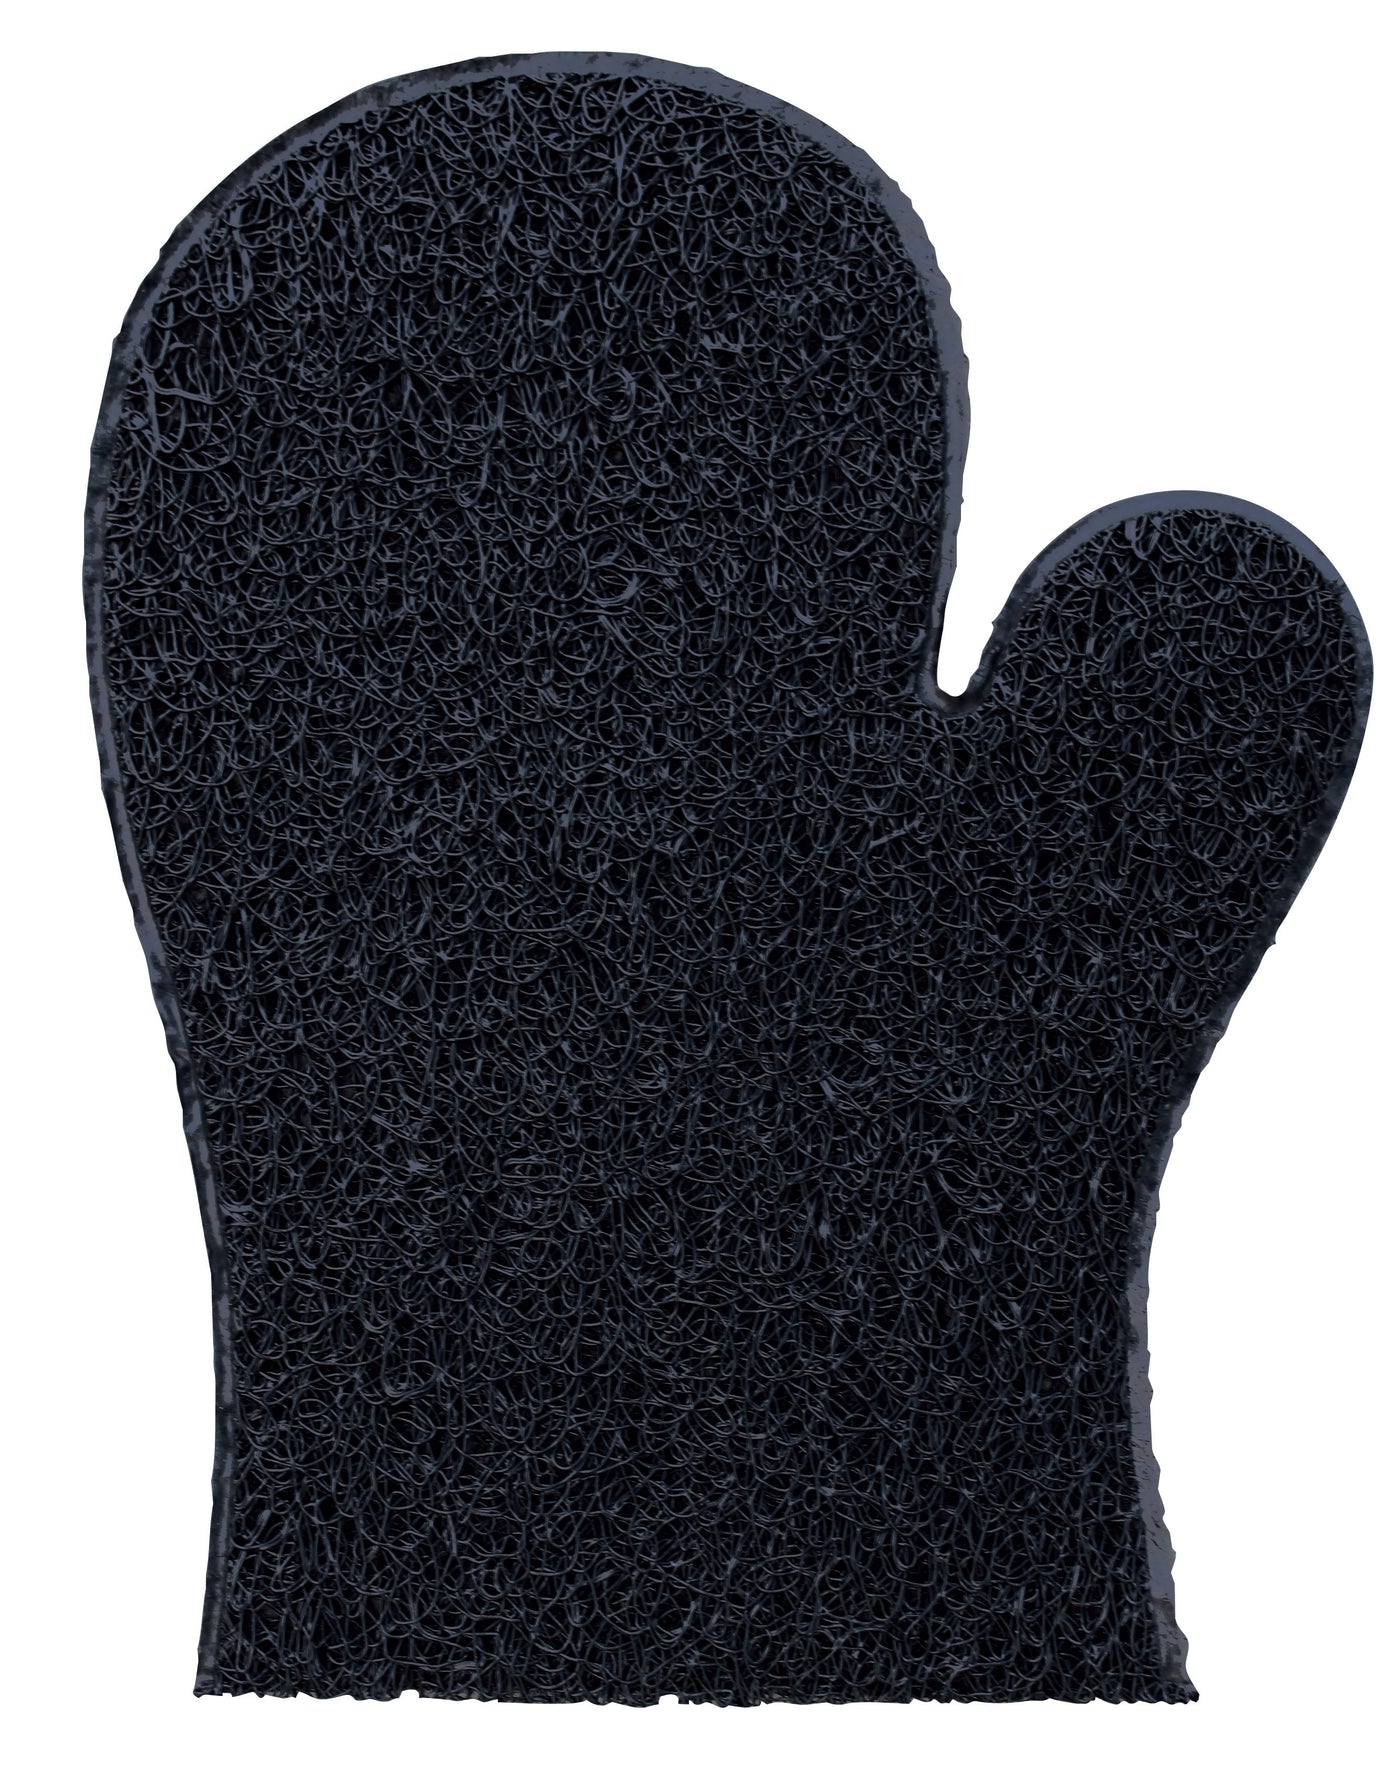 Professional’s Choice Miracle Mitt